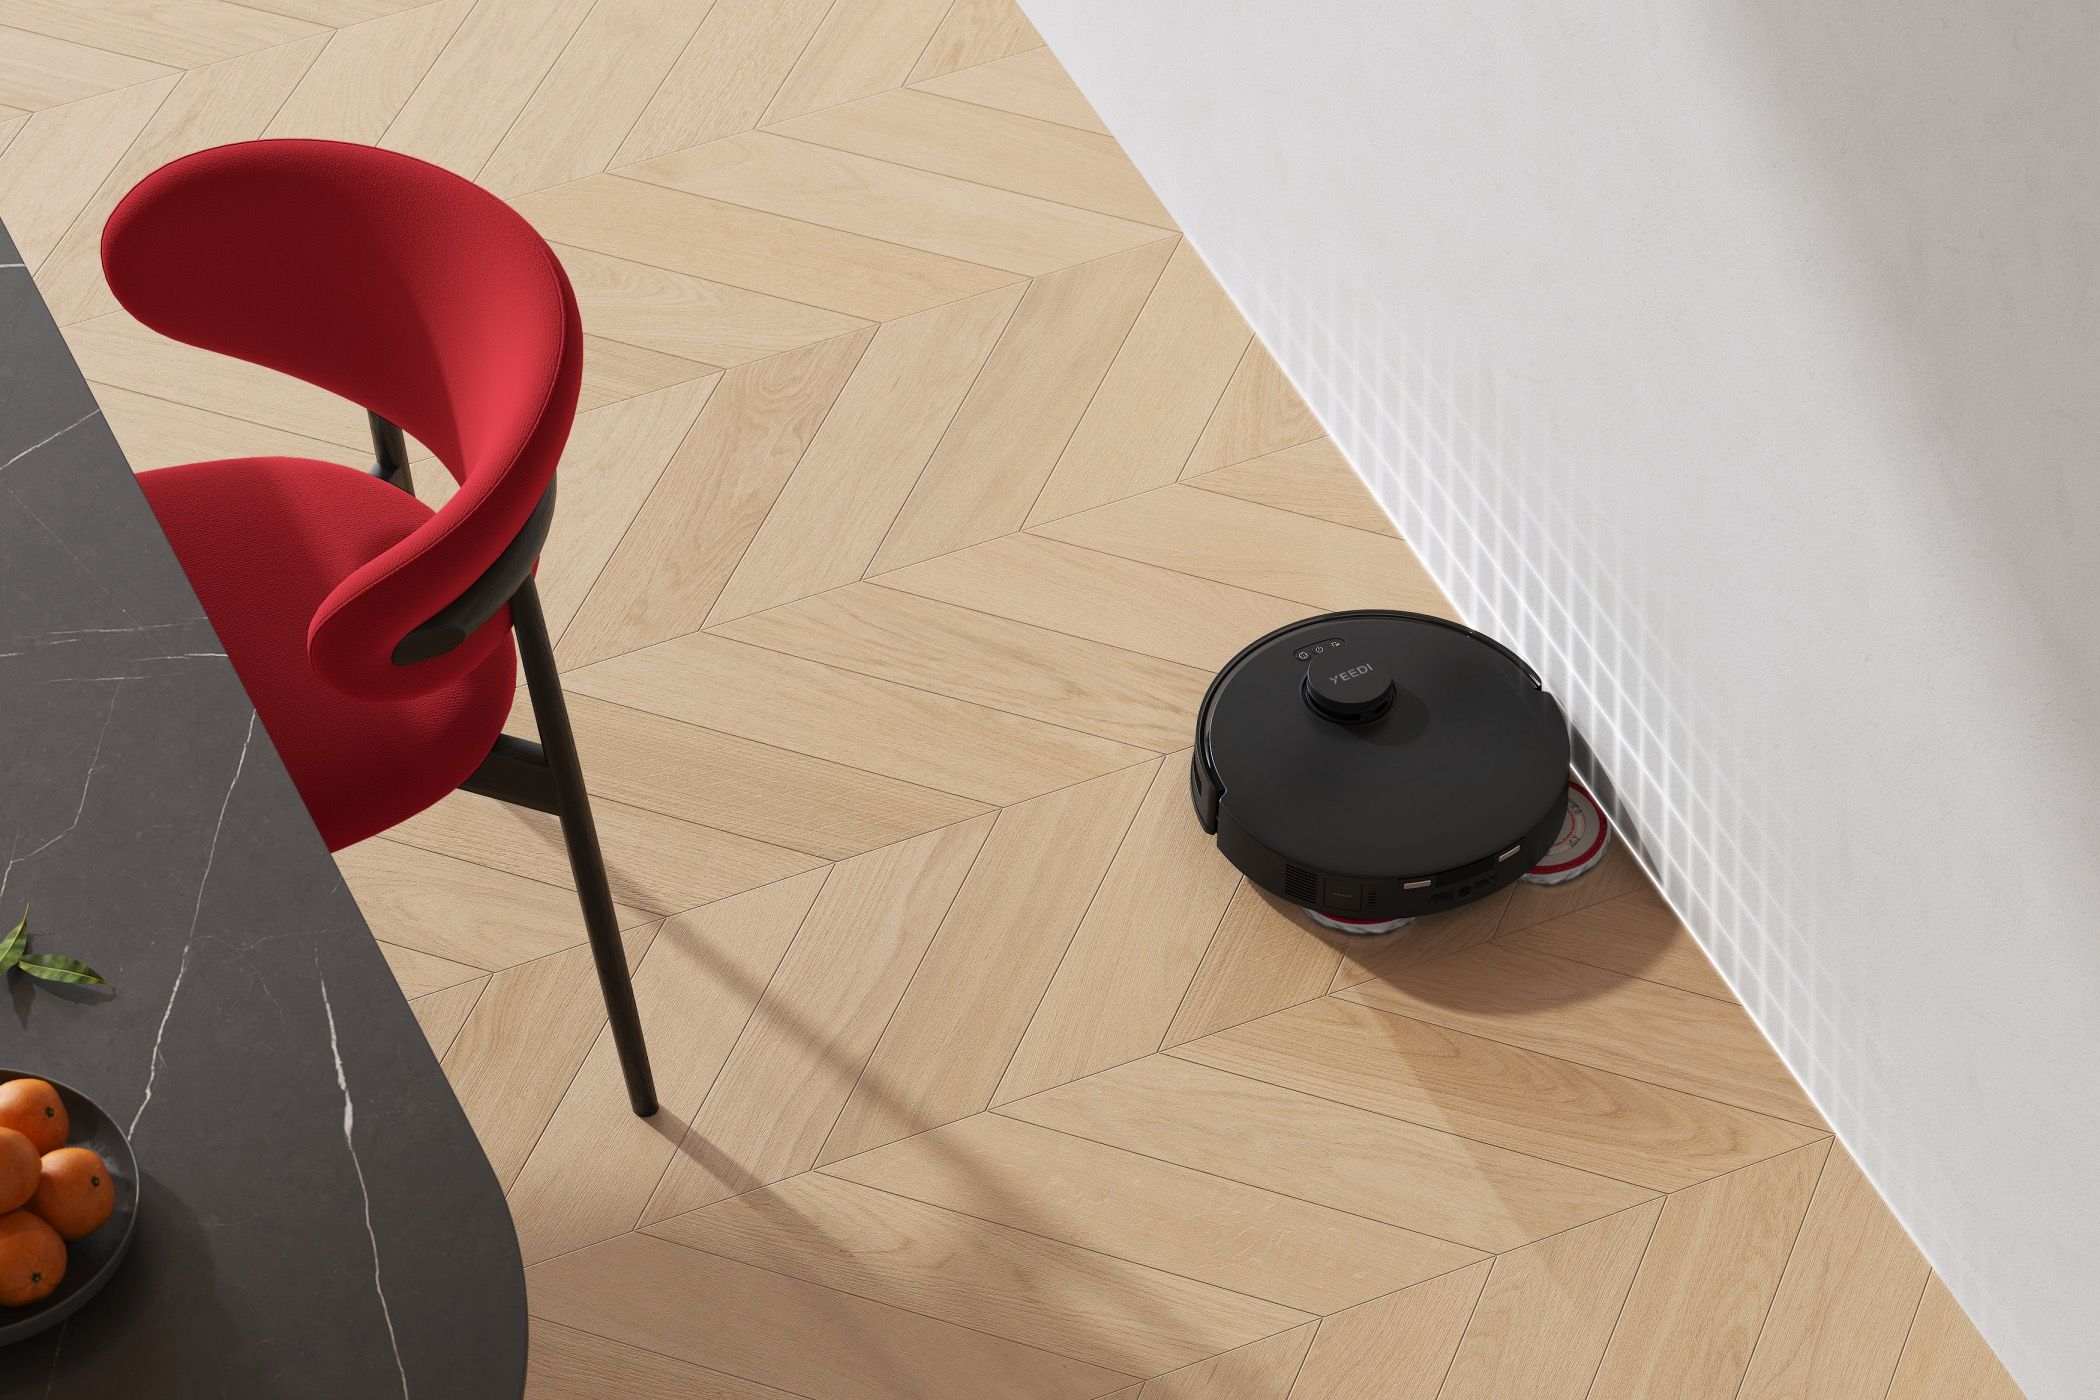 A YEEDI M12 Pro+ robot vacuum cleaning to the edge.